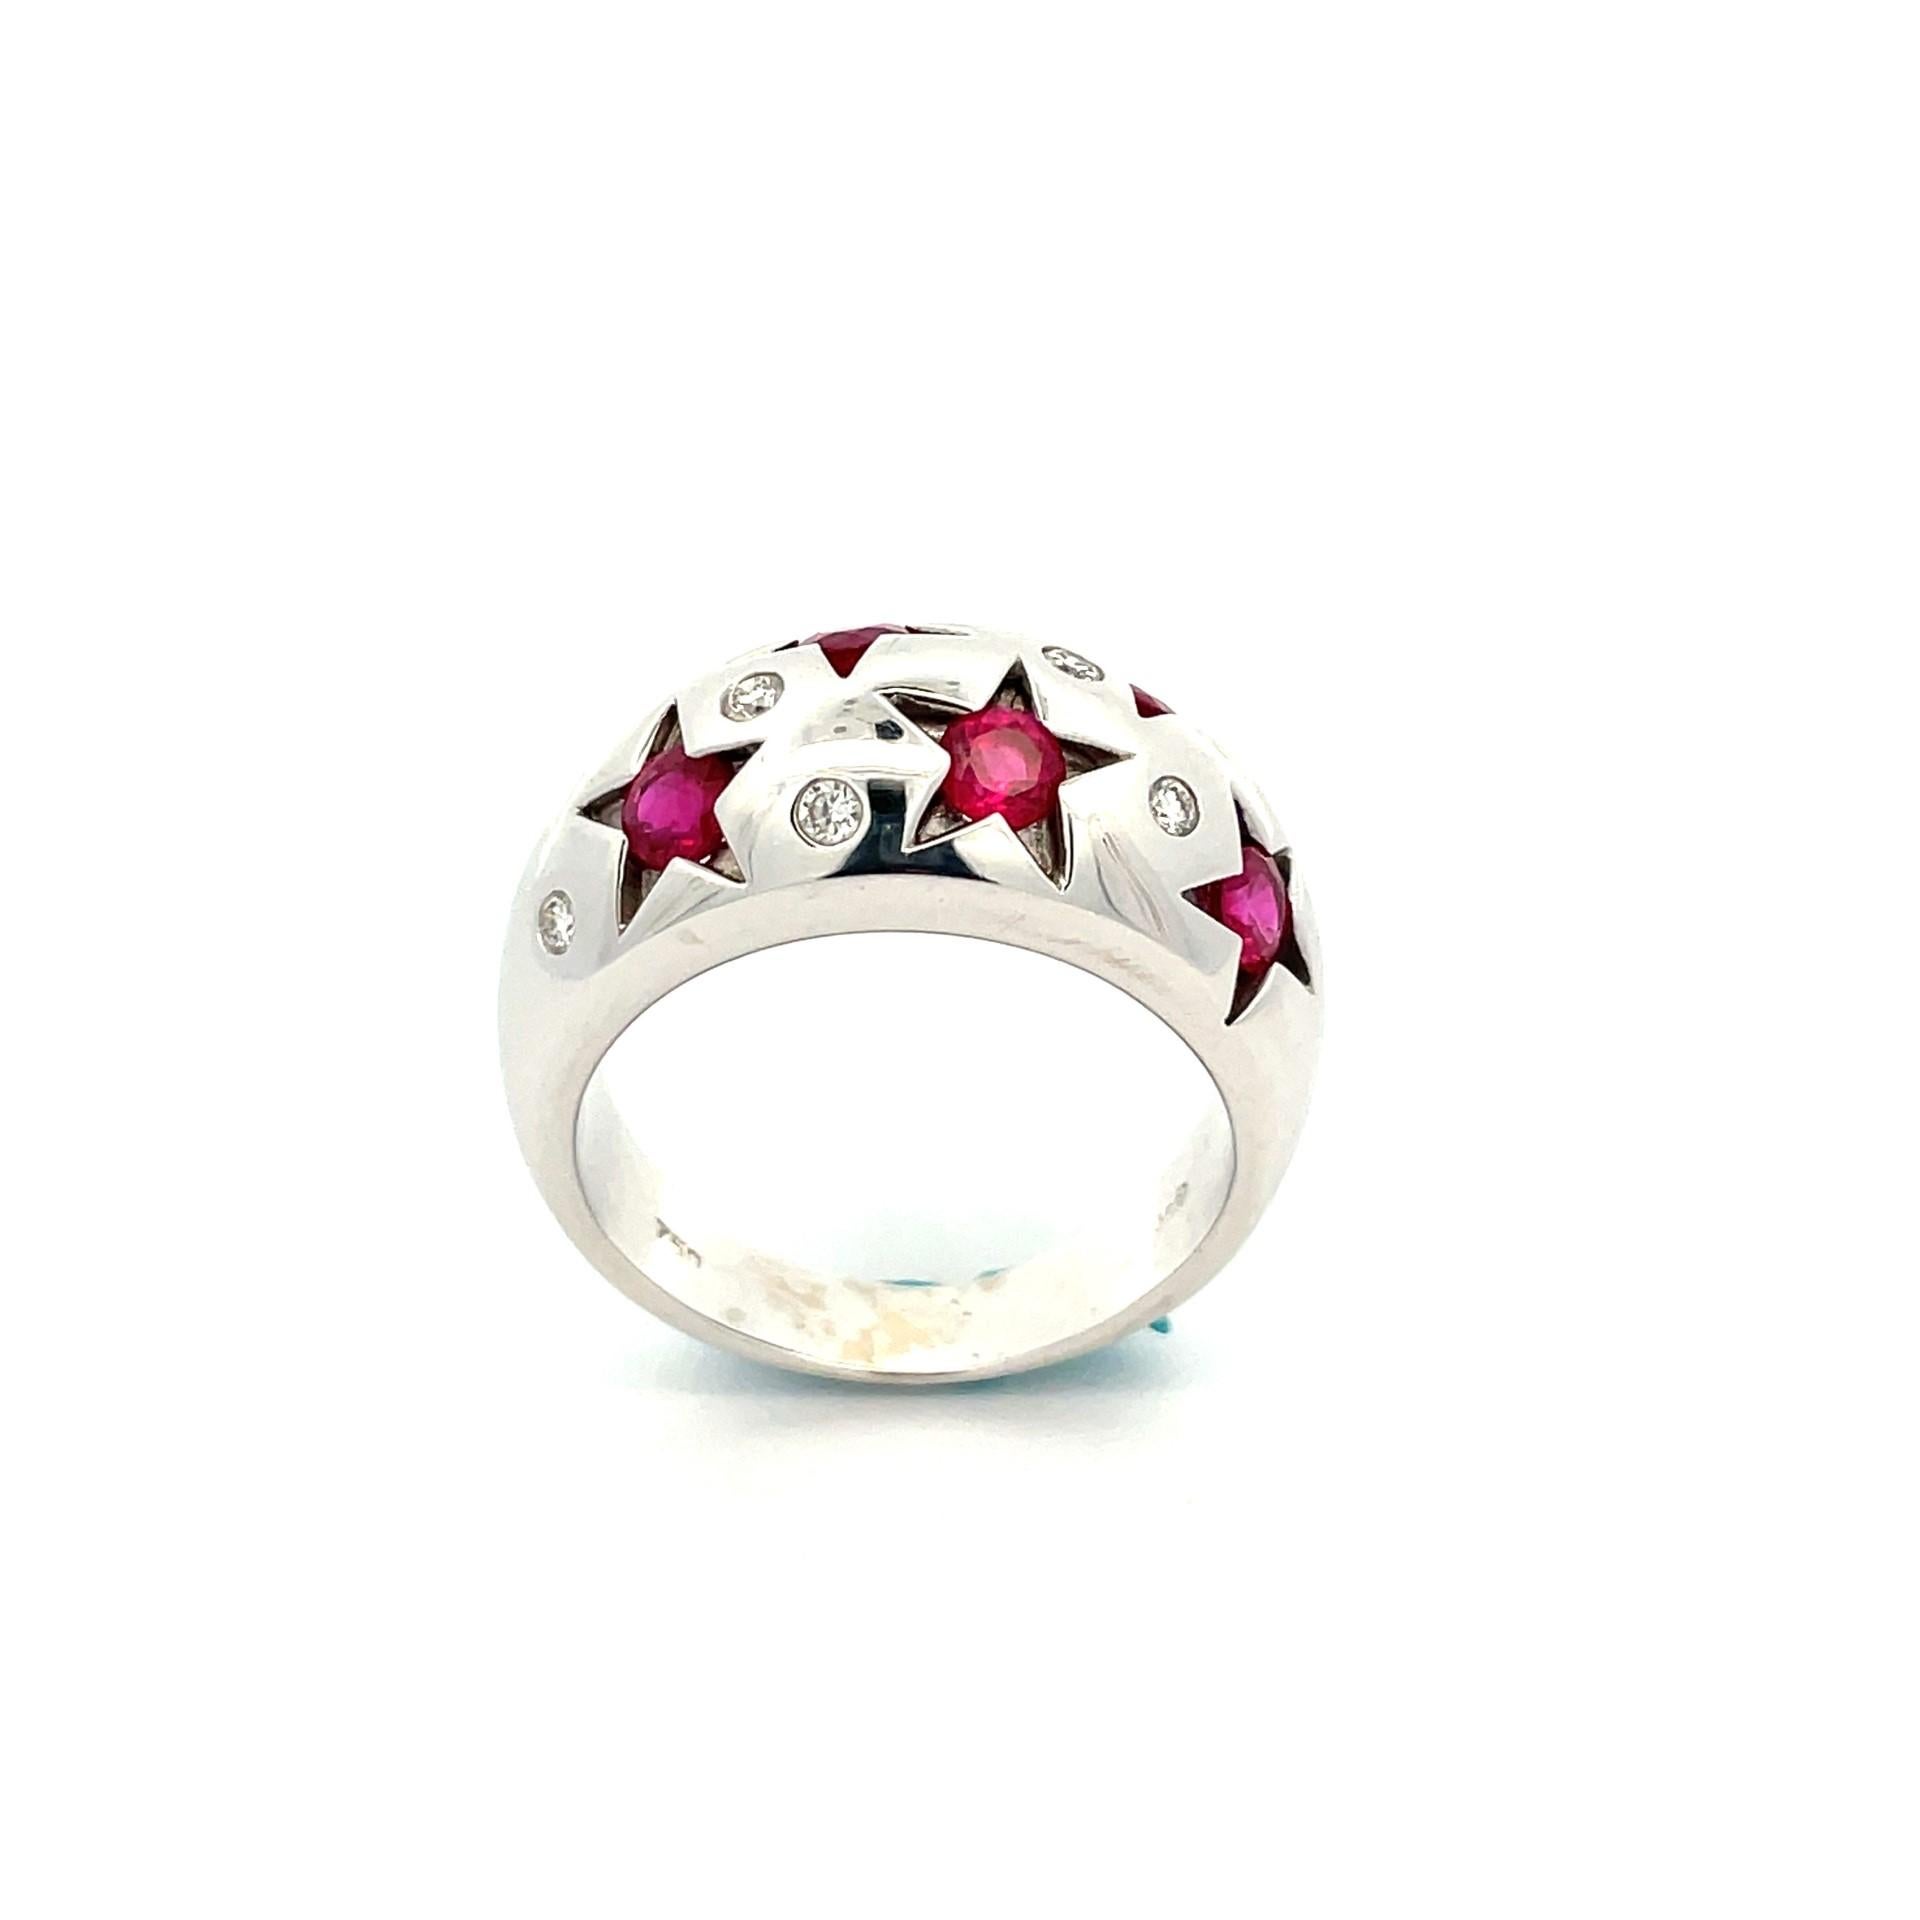 One 18kt white gold polished star ring with natural red ruby and natural white diamonds. Feel like a star !

6 round cut natural ruby weighing 1.42ct total weight

8 brilliant cut diamonds weighing 0.19ct total weight, quality G/VS

18kt white gold,